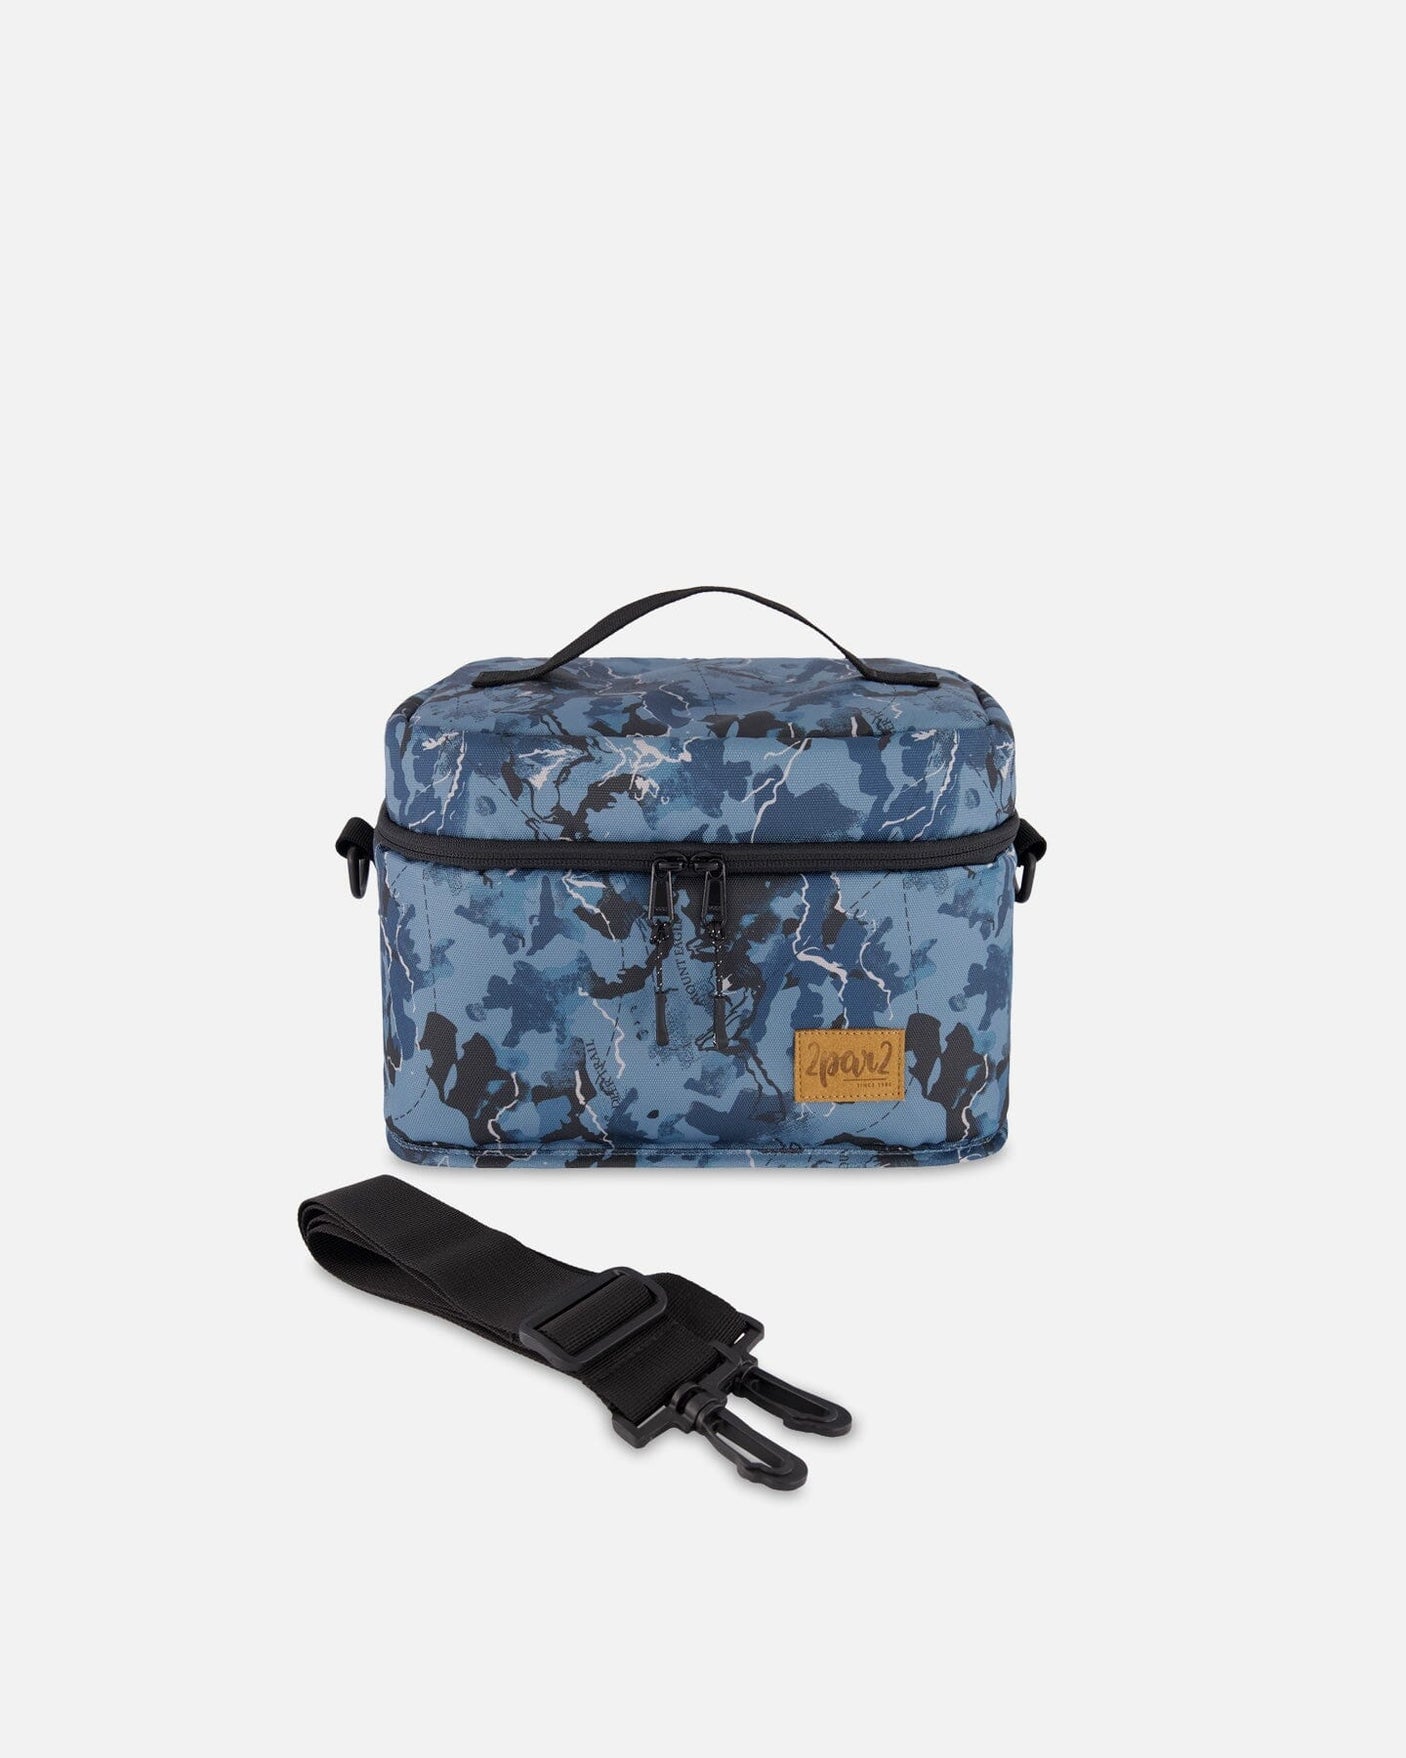 Lunch Box Blue And Black Cartography Print-0